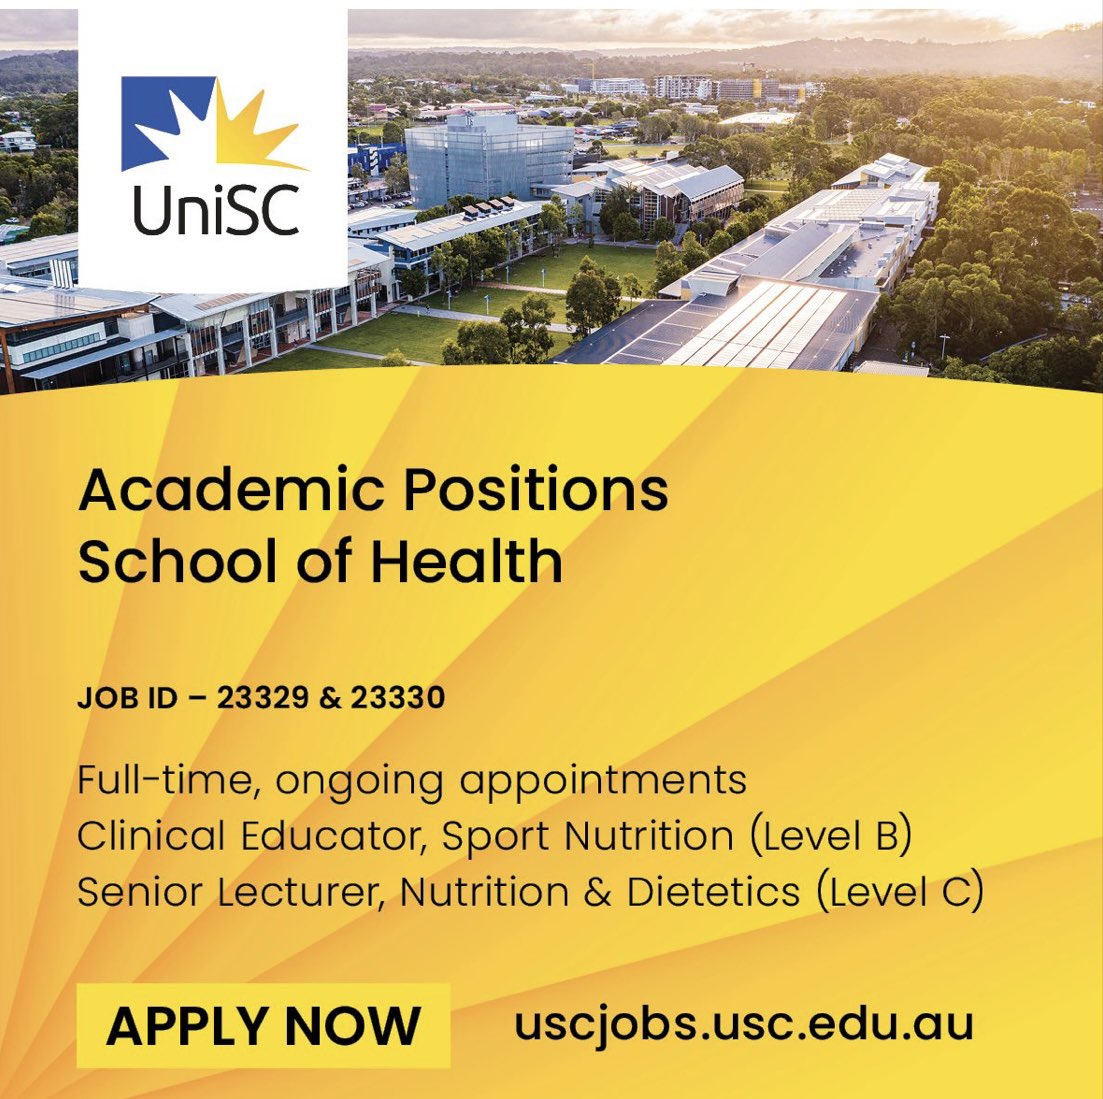 Exciting new job opportunities in sports nutrition at UniSC @usceduau . Apply now to join our team. #UniSCsportsnutrition